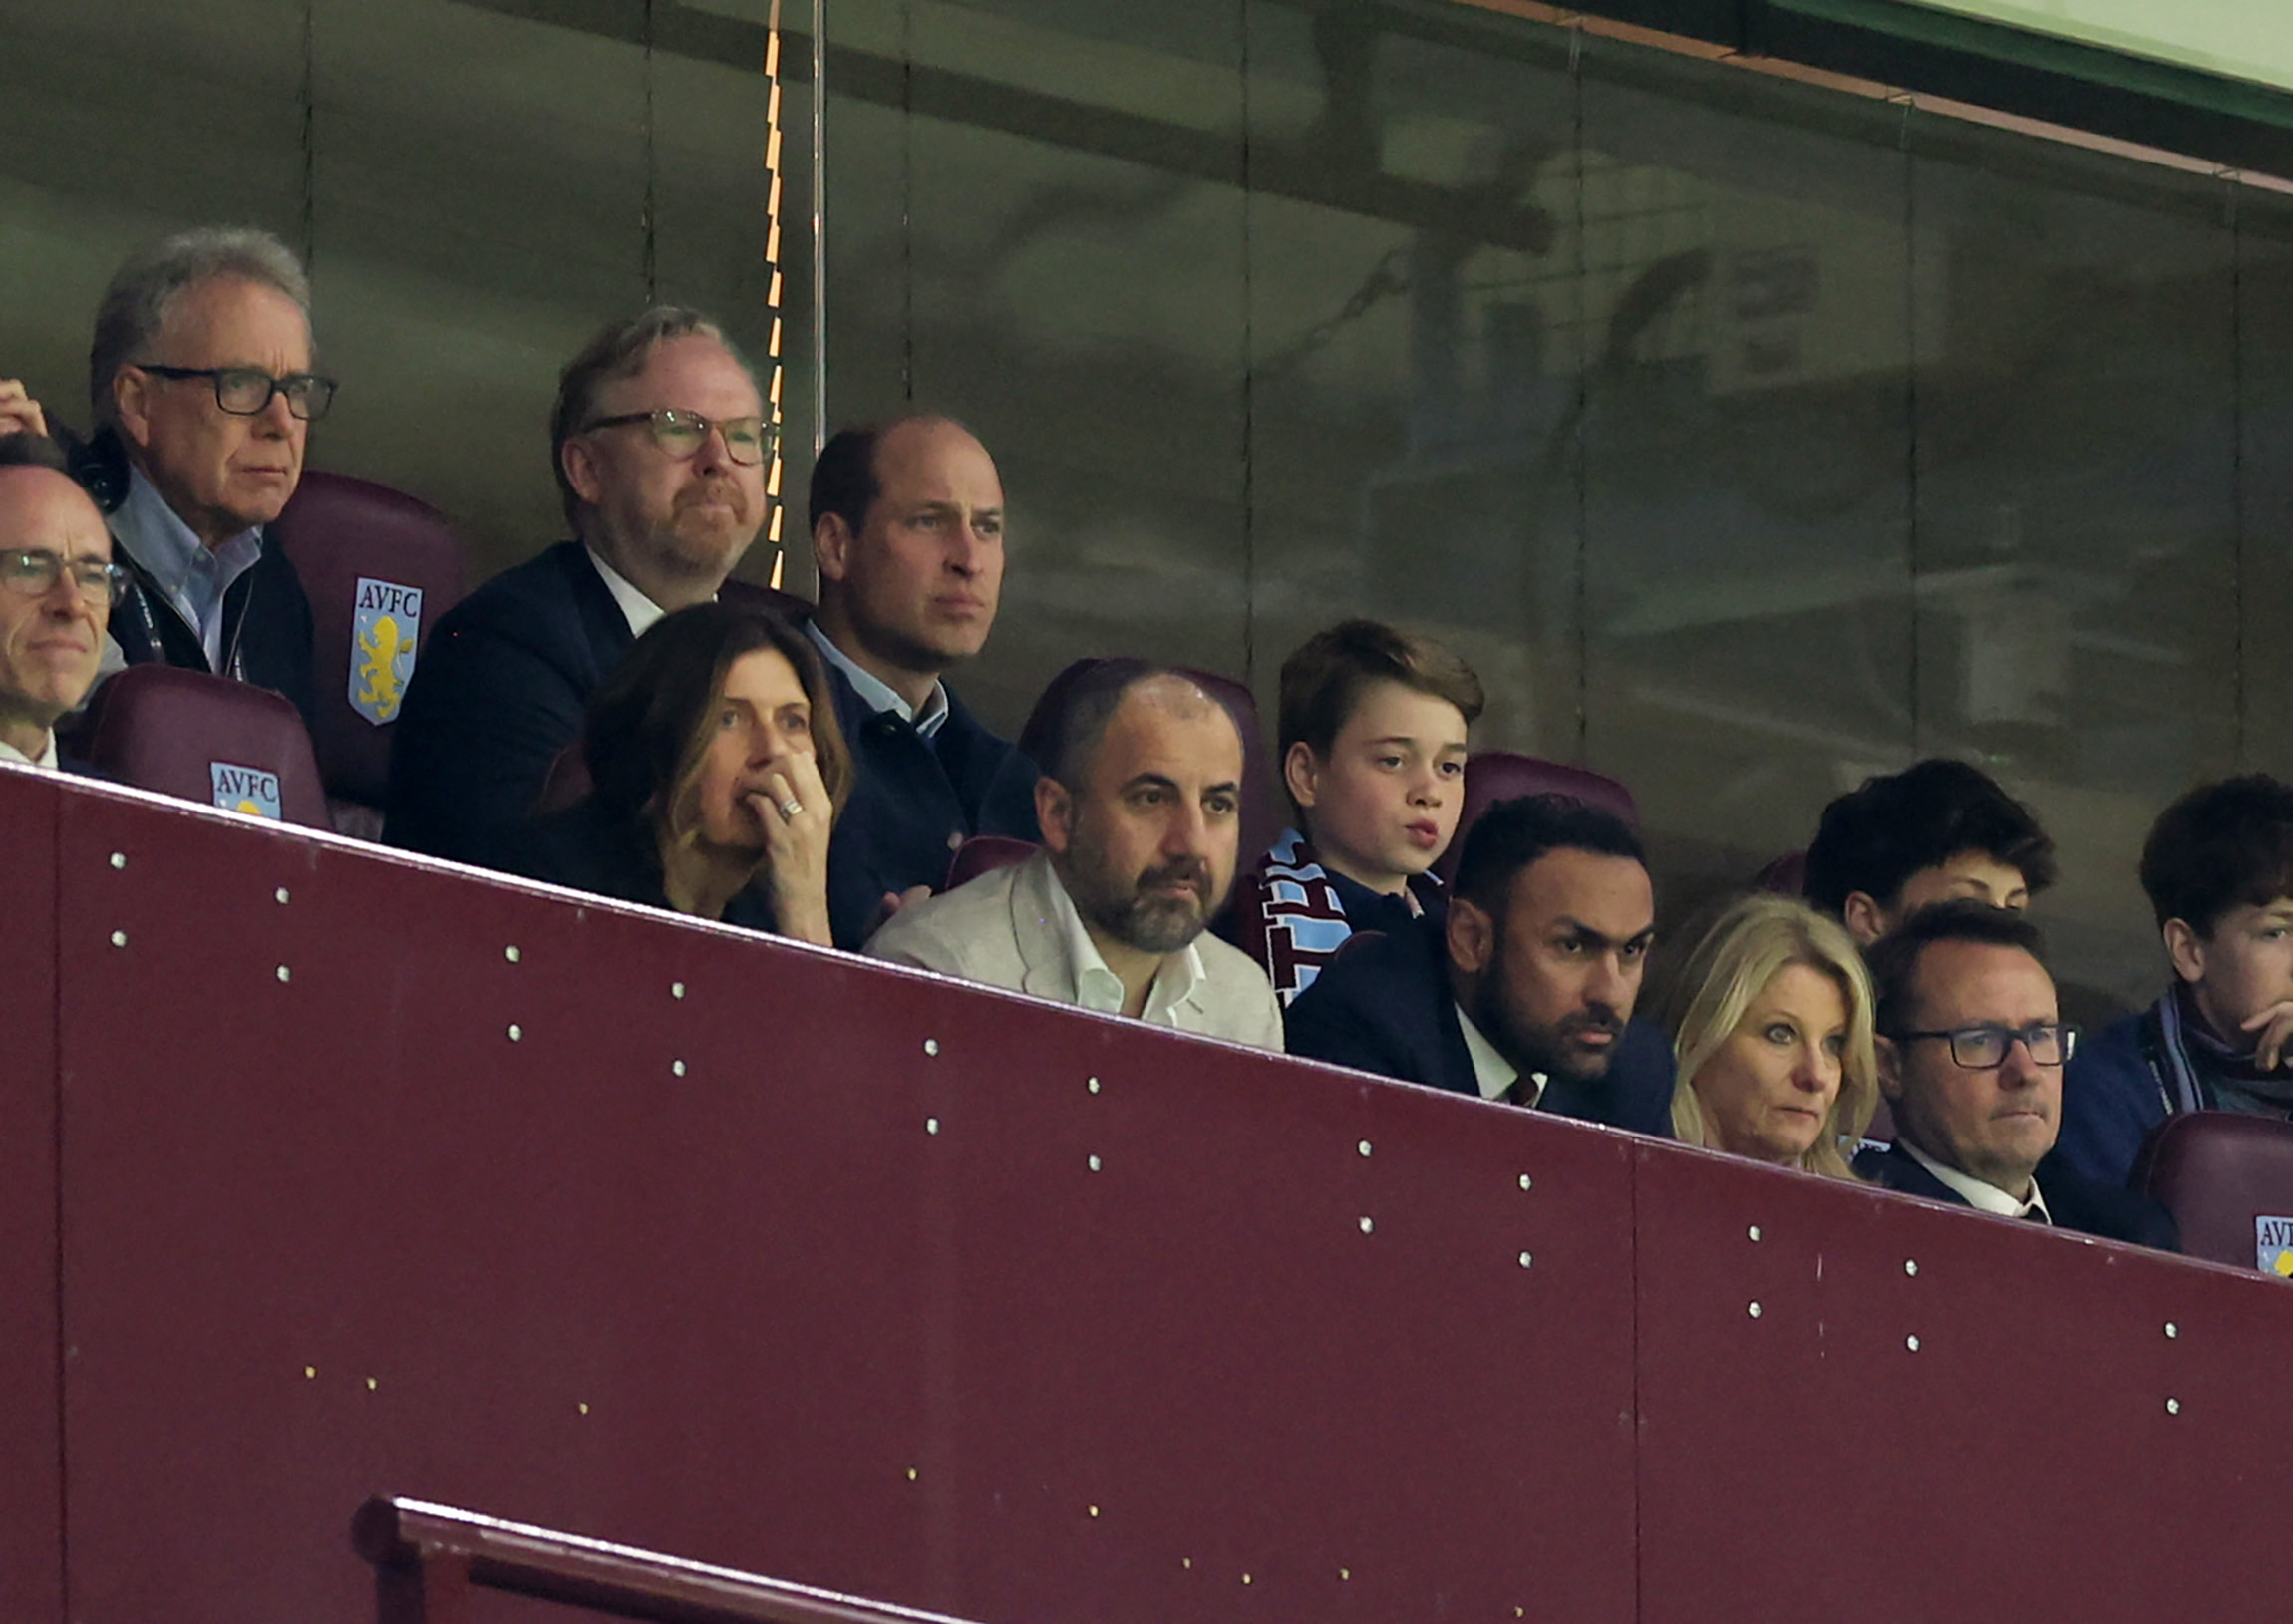 Prince William and Prince George at the Aston Villa and Lille OSC match in Birmingham, England on April 11, 2024 | Source: Getty Images